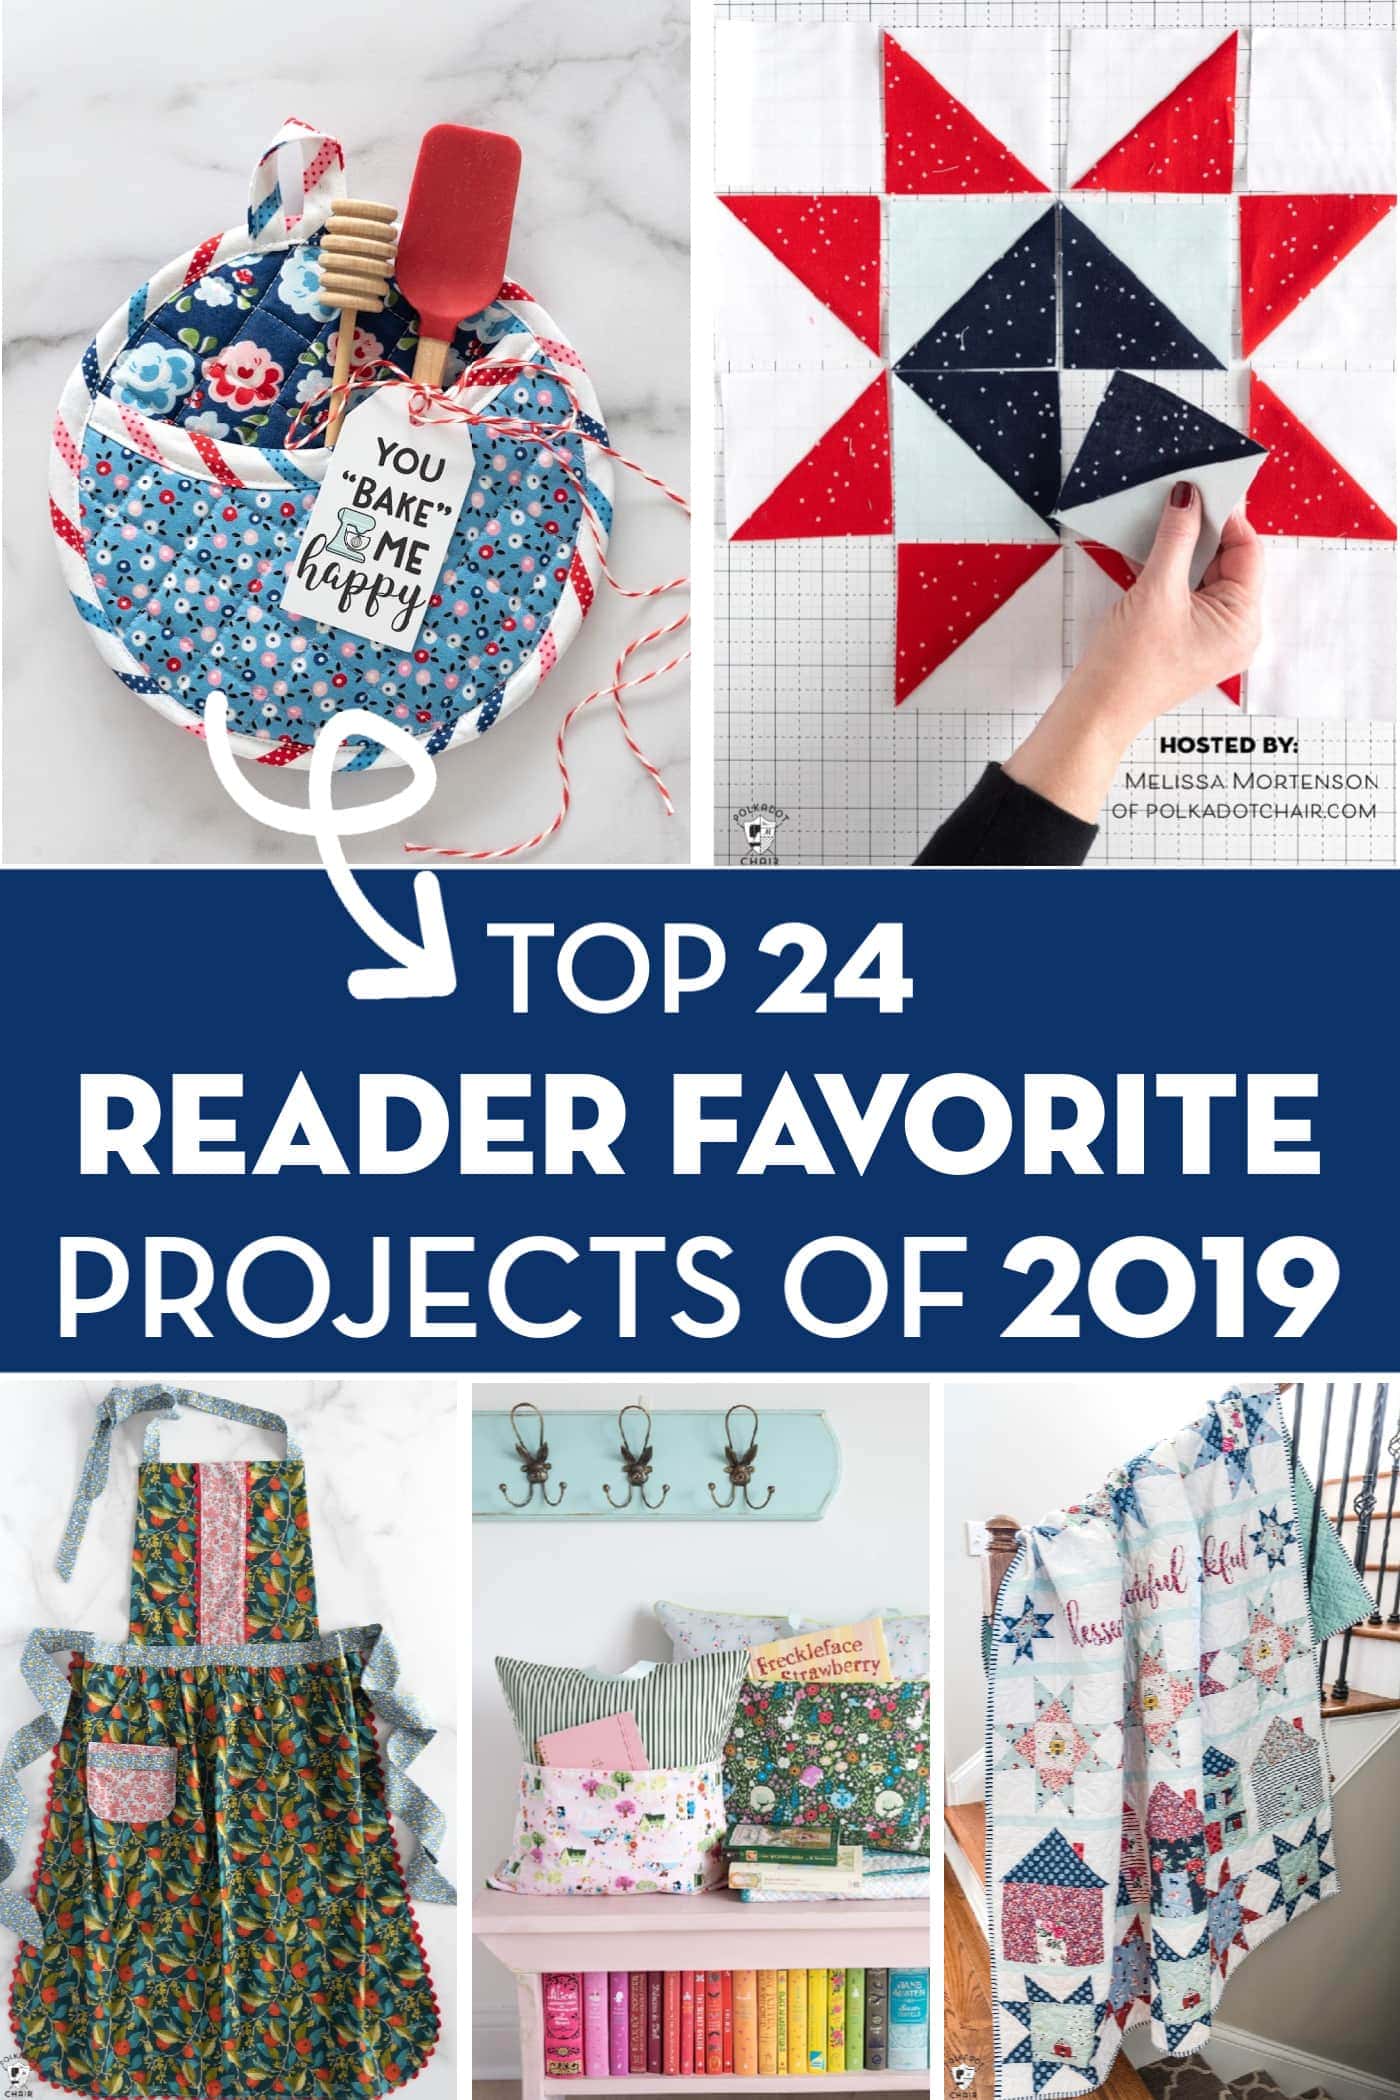 Top 24 Reader Favorite Projects of 2019